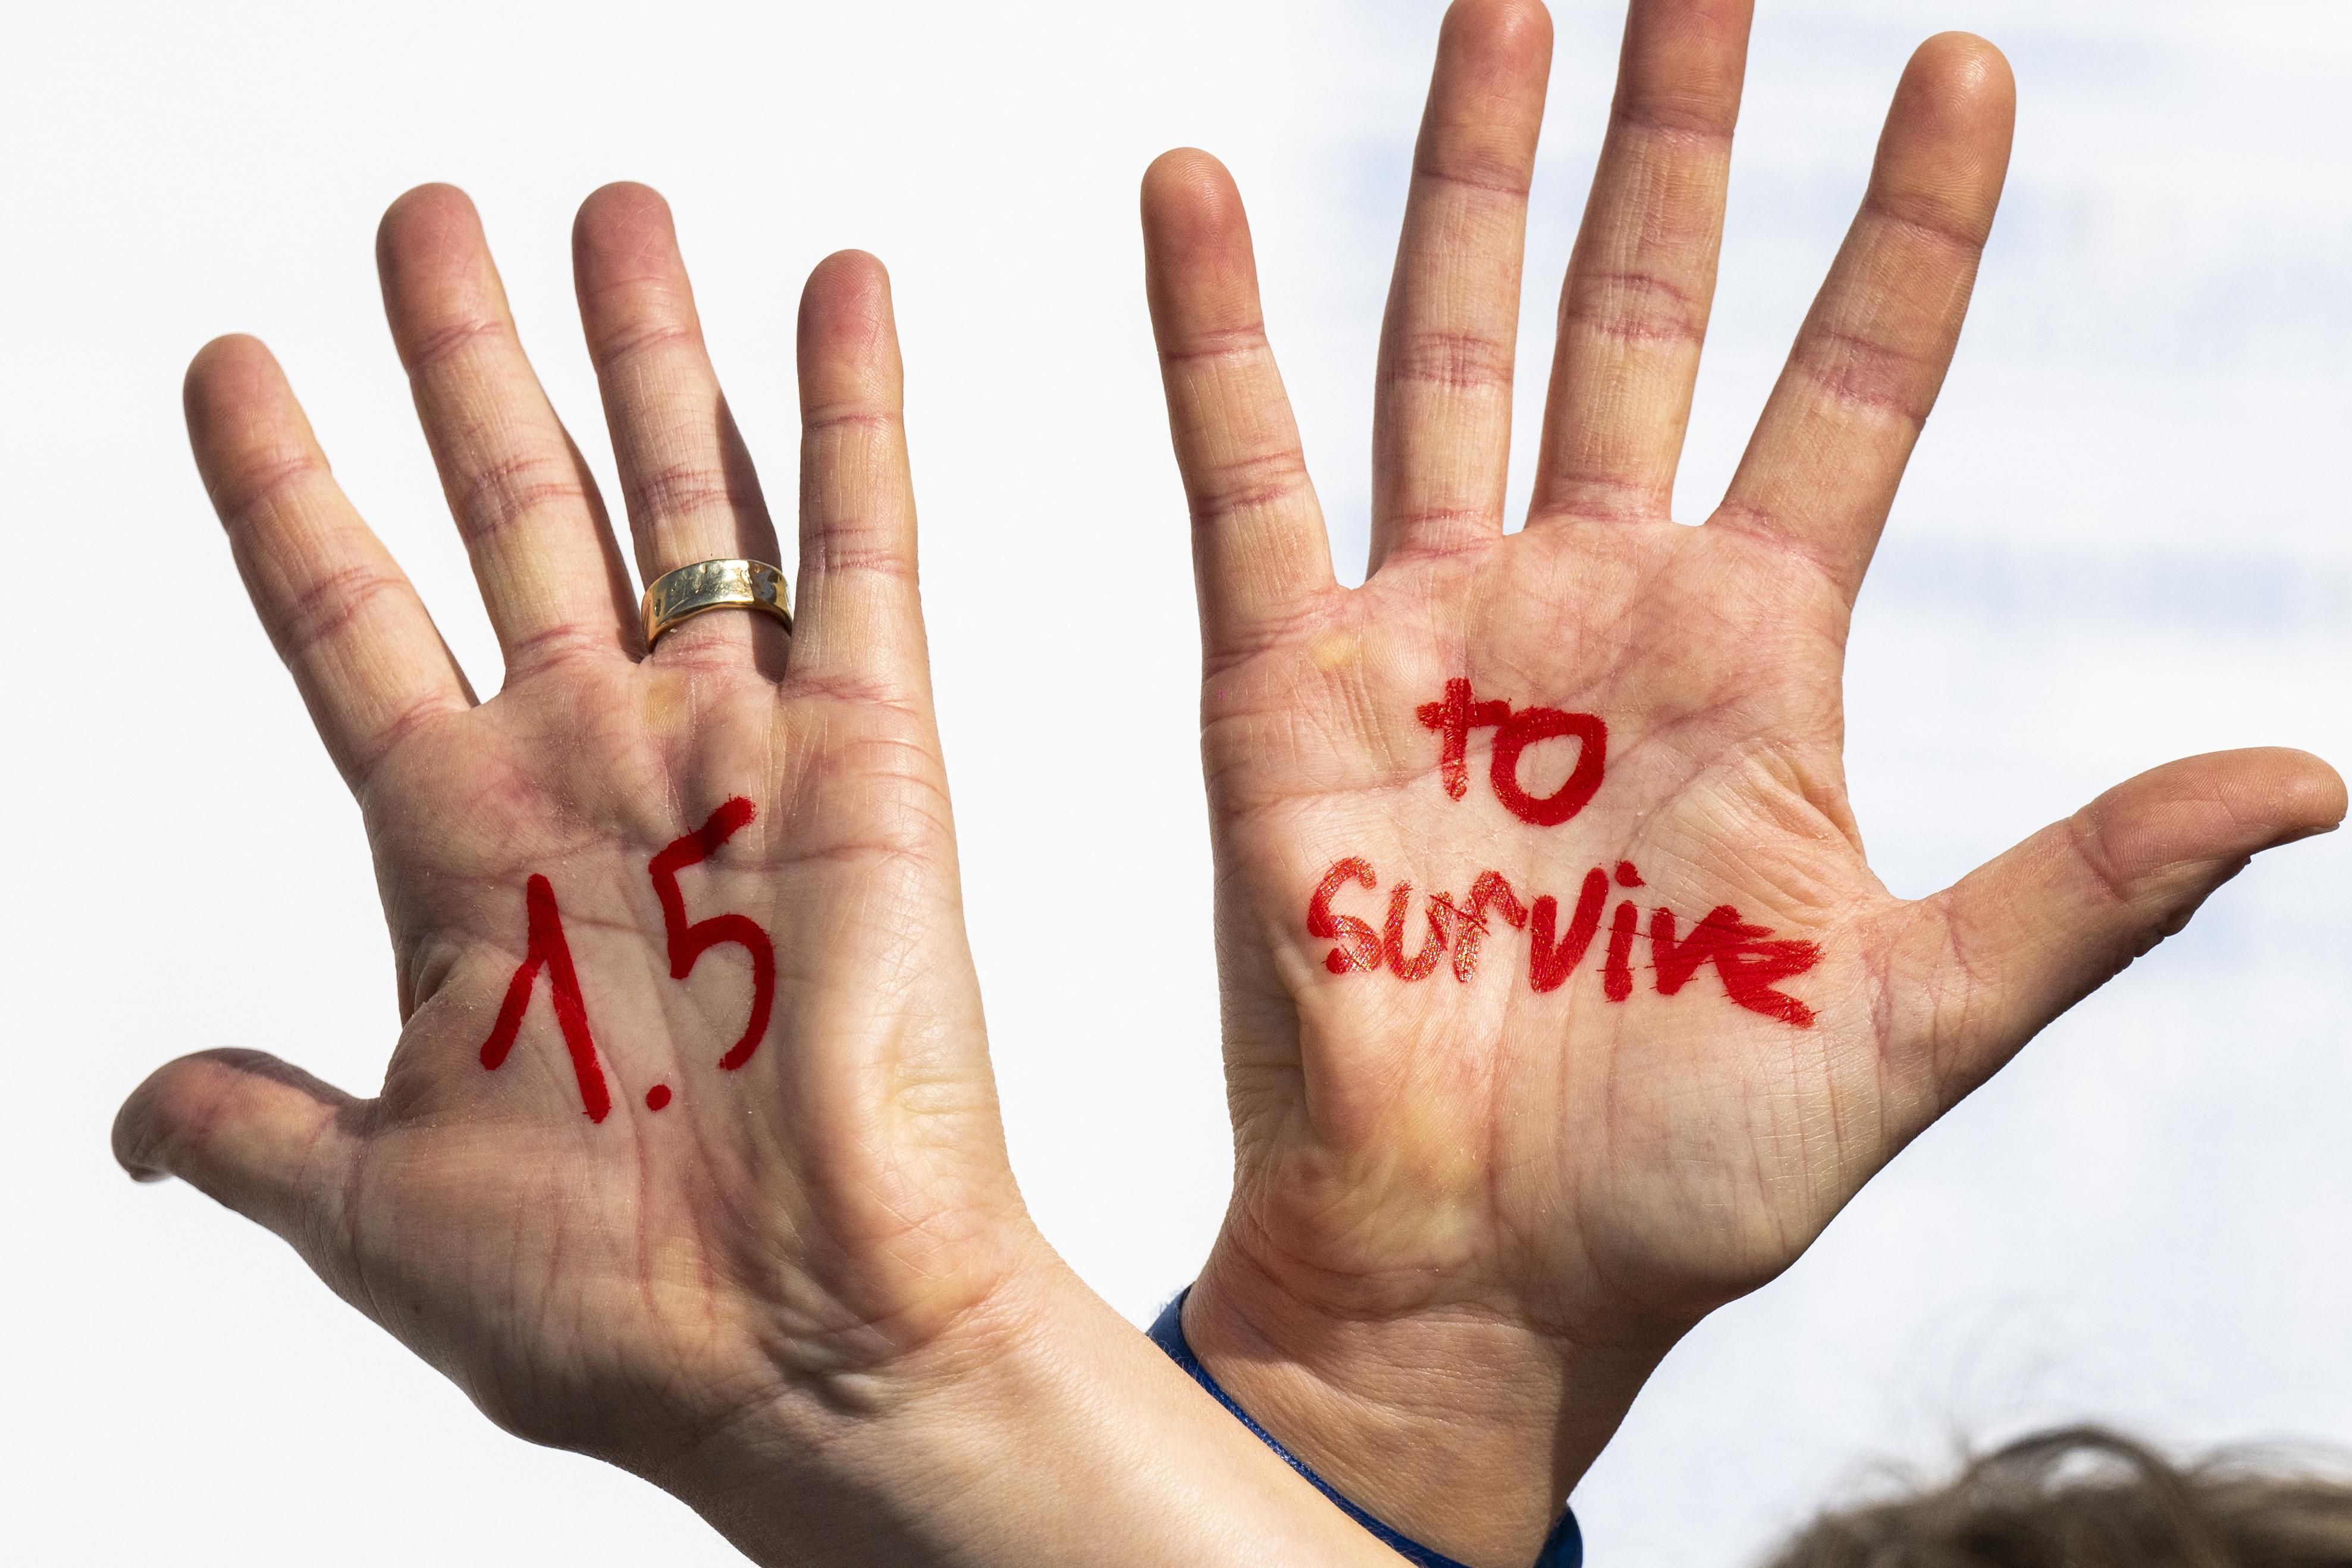 "1.5 to survive" message at protest